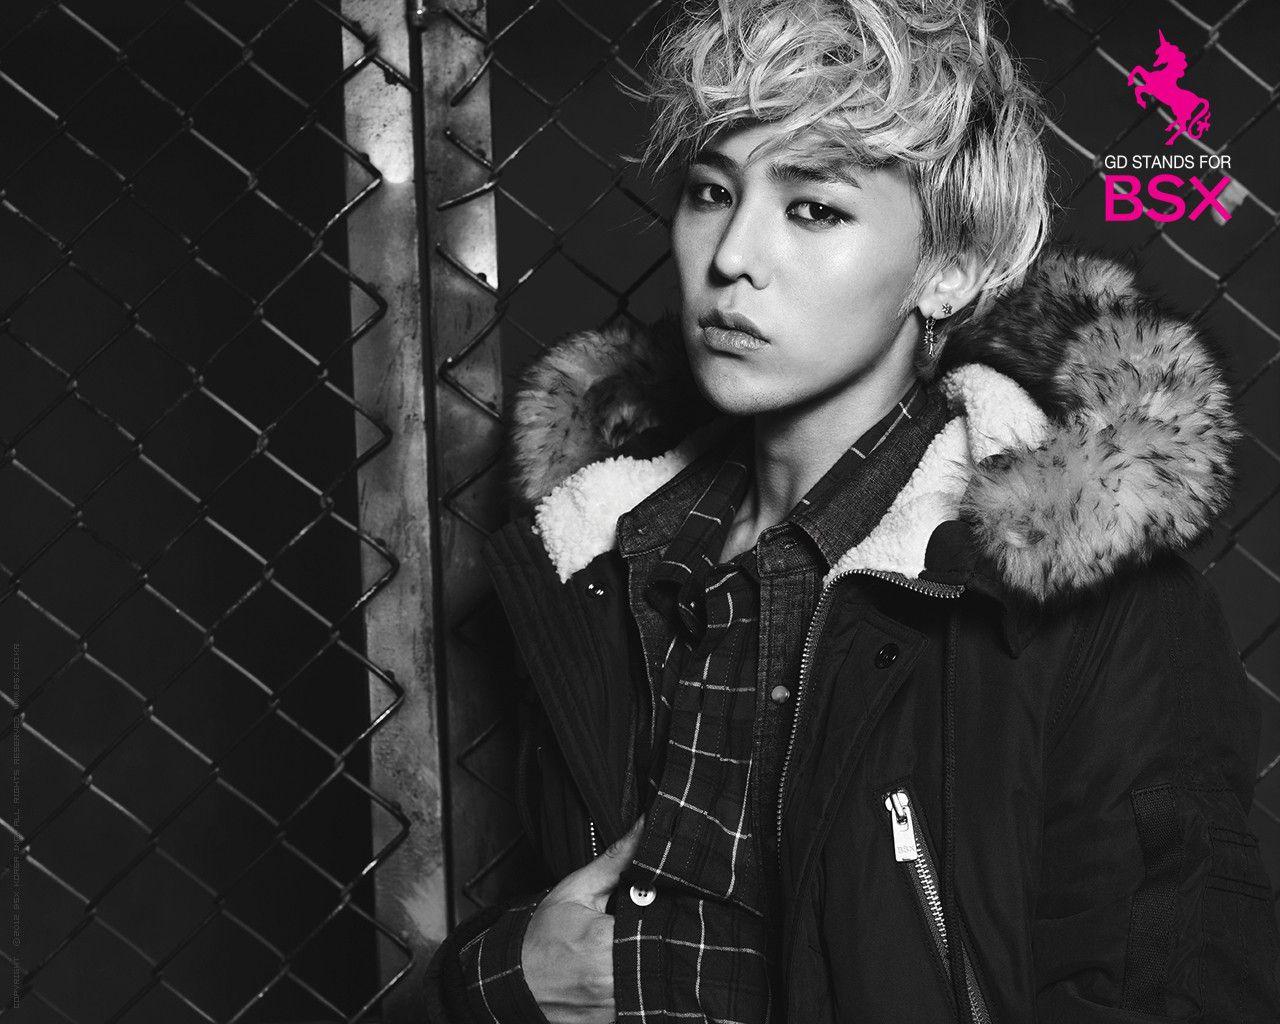 G Dragon Image BSX Winter Wallpaper HD Wallpaper And Background